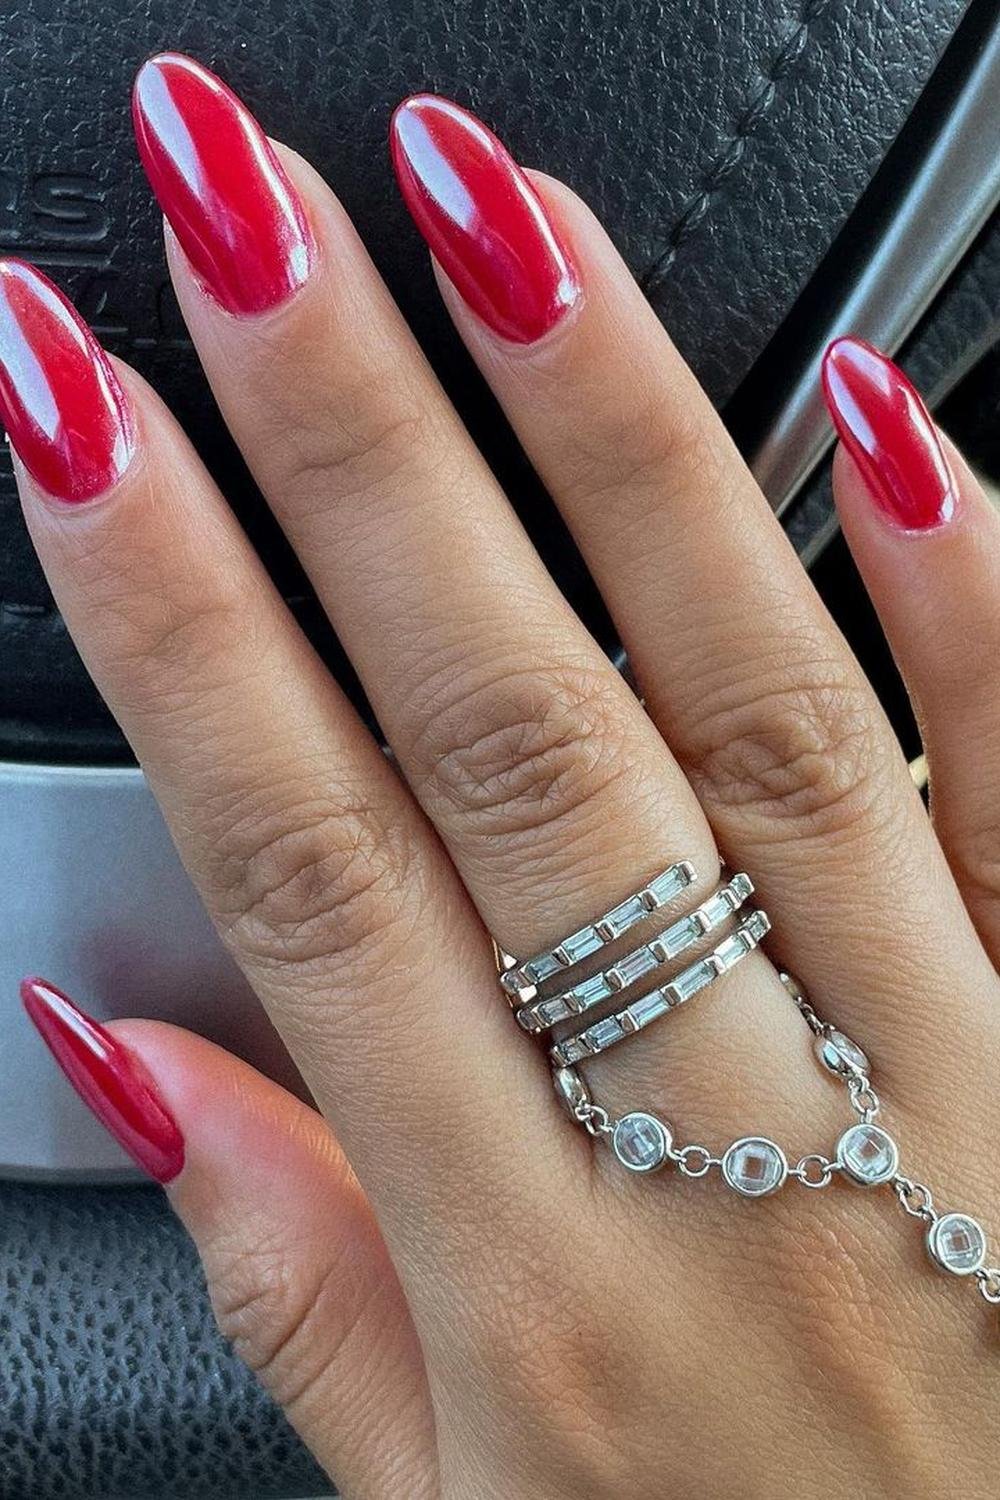 17 - Picture of Red Chrome Nails